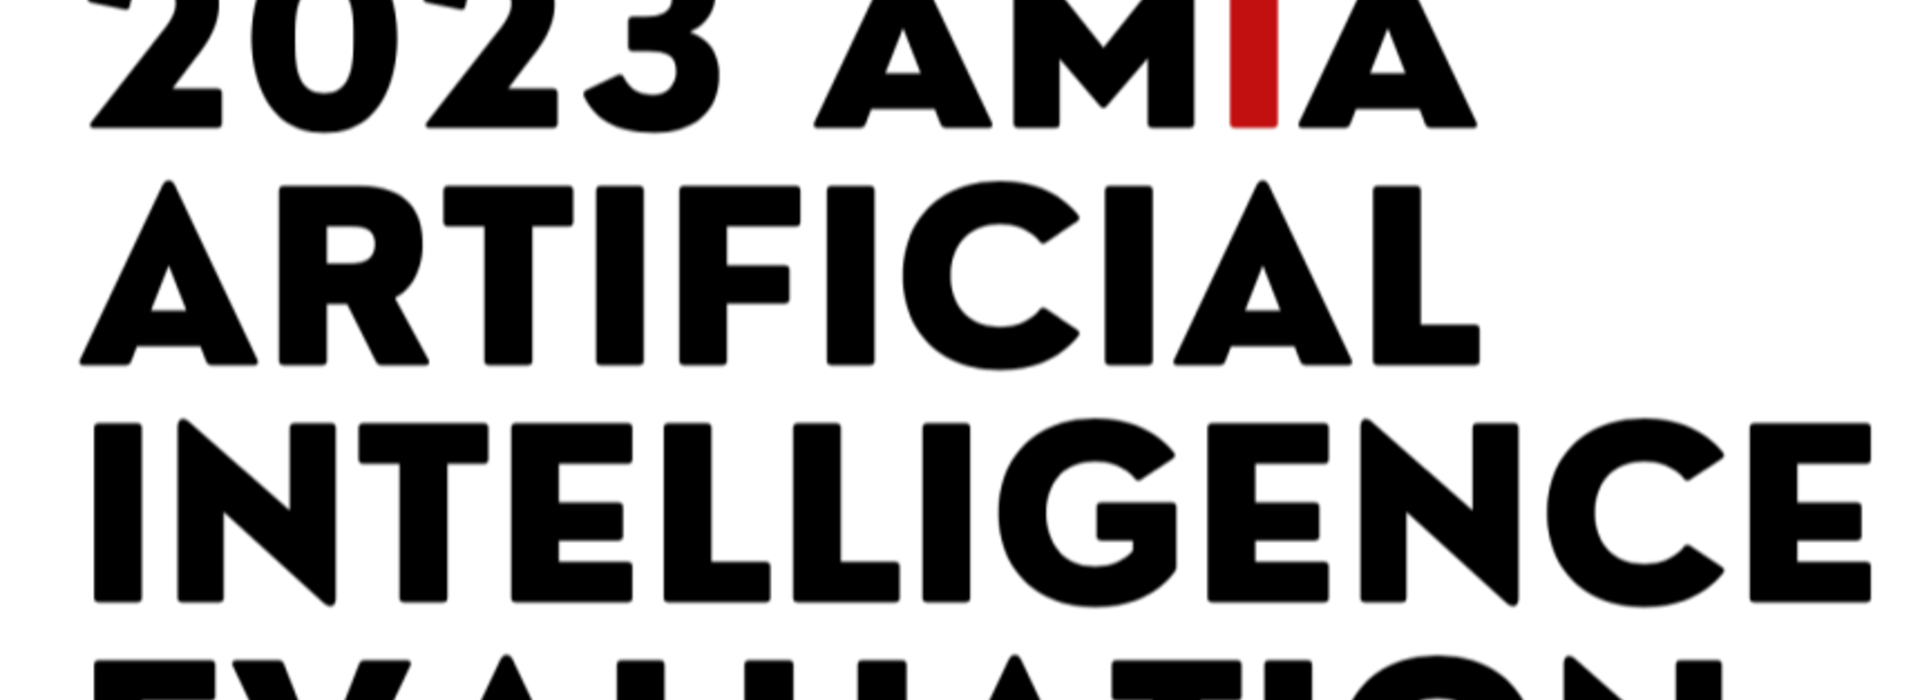 Graphic that says "Call for Participation: 2023 AMIA Artificial Intelligence Evaluation Showcase"